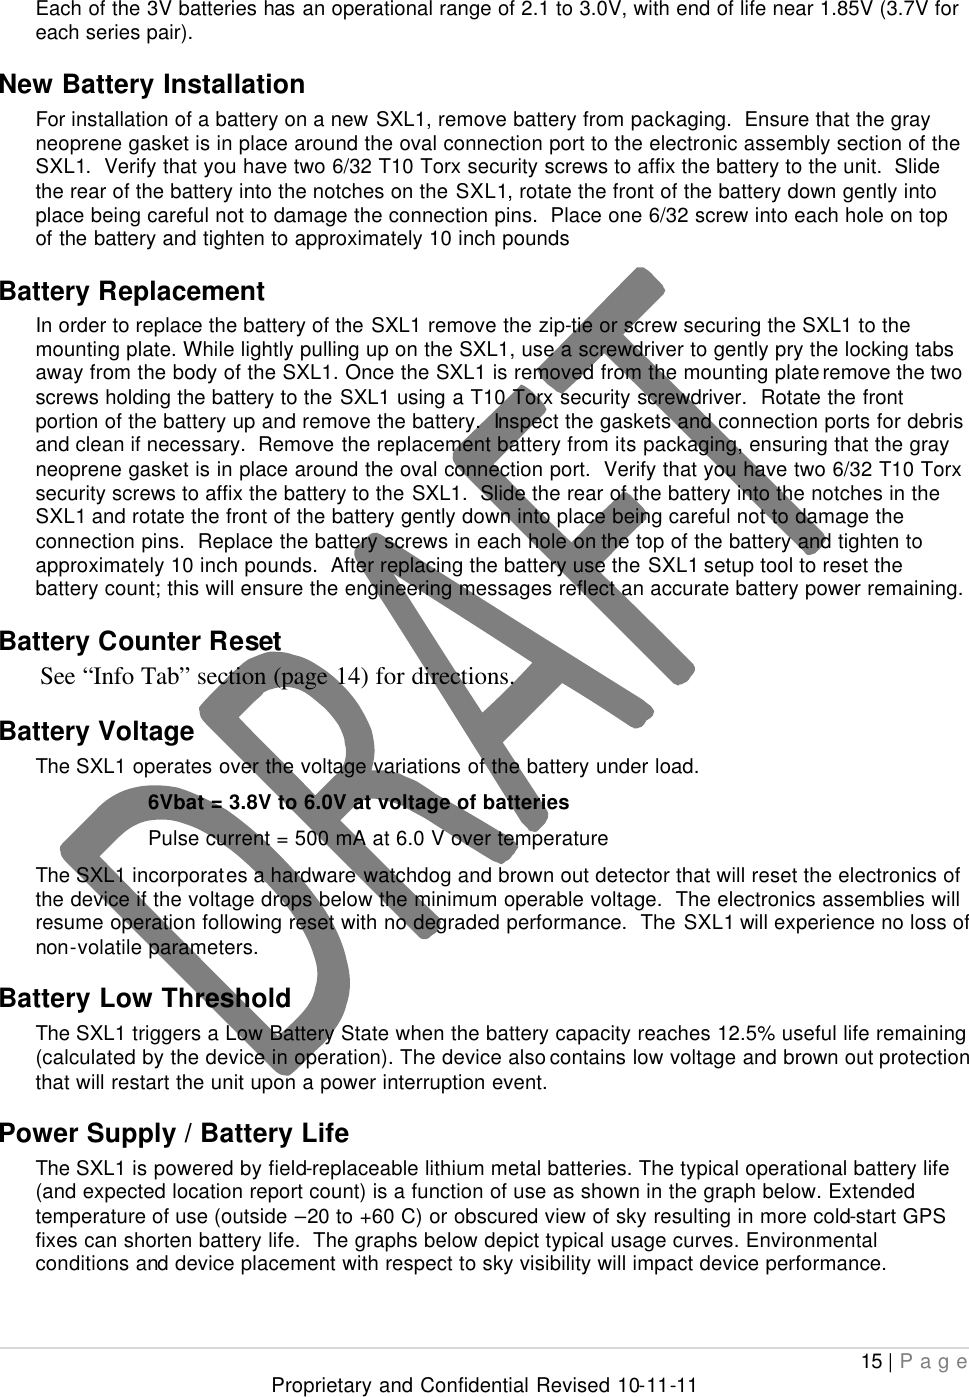  15 | Page Proprietary and Confidential Revised 10-11-11  Each of the 3V batteries has an operational range of 2.1 to 3.0V, with end of life near 1.85V (3.7V for each series pair). New Battery Installation For installation of a battery on a new SXL1, remove battery from packaging.  Ensure that the gray neoprene gasket is in place around the oval connection port to the electronic assembly section of the SXL1.  Verify that you have two 6/32 T10 Torx security screws to affix the battery to the unit.  Slide the rear of the battery into the notches on the SXL1, rotate the front of the battery down gently into place being careful not to damage the connection pins.  Place one 6/32 screw into each hole on top of the battery and tighten to approximately 10 inch pounds Battery Replacement In order to replace the battery of the SXL1 remove the zip-tie or screw securing the SXL1 to the mounting plate. While lightly pulling up on the SXL1, use a screwdriver to gently pry the locking tabs away from the body of the SXL1. Once the SXL1 is removed from the mounting plate remove the two screws holding the battery to the SXL1 using a T10 Torx security screwdriver.  Rotate the front portion of the battery up and remove the battery.  Inspect the gaskets and connection ports for debris and clean if necessary.  Remove the replacement battery from its packaging, ensuring that the gray neoprene gasket is in place around the oval connection port.  Verify that you have two 6/32 T10 Torx security screws to affix the battery to the SXL1.  Slide the rear of the battery into the notches in the SXL1 and rotate the front of the battery gently down into place being careful not to damage the connection pins.  Replace the battery screws in each hole on the top of the battery and tighten to approximately 10 inch pounds.  After replacing the battery use the SXL1 setup tool to reset the battery count; this will ensure the engineering messages reflect an accurate battery power remaining. Battery Counter Reset See “Info Tab” section (page 14) for directions. Battery Voltage The SXL1 operates over the voltage variations of the battery under load. 6Vbat = 3.8V to 6.0V at voltage of batteries     Pulse current = 500 mA at 6.0 V over temperature The SXL1 incorporates a hardware watchdog and brown out detector that will reset the electronics of the device if the voltage drops below the minimum operable voltage.  The electronics assemblies will resume operation following reset with no degraded performance.  The SXL1 will experience no loss of non-volatile parameters. Battery Low Threshold The SXL1 triggers a Low Battery State when the battery capacity reaches 12.5% useful life remaining (calculated by the device in operation). The device also contains low voltage and brown out protection that will restart the unit upon a power interruption event. Power Supply / Battery Life The SXL1 is powered by field-replaceable lithium metal batteries. The typical operational battery life (and expected location report count) is a function of use as shown in the graph below. Extended temperature of use (outside –20 to +60 C) or obscured view of sky resulting in more cold-start GPS fixes can shorten battery life.  The graphs below depict typical usage curves. Environmental conditions and device placement with respect to sky visibility will impact device performance.  